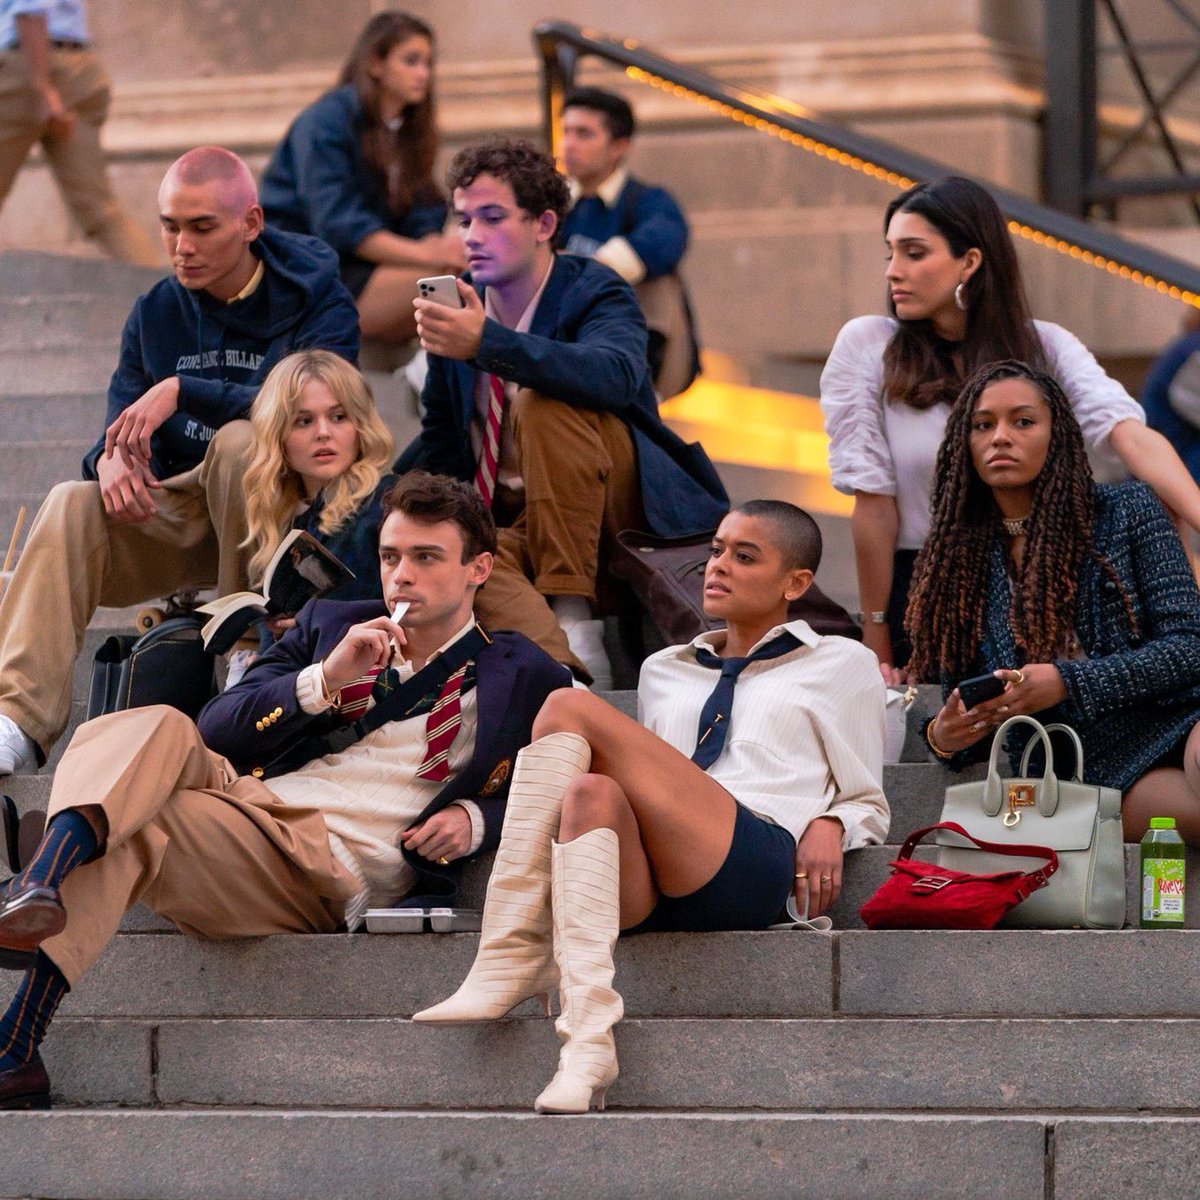 Season 2 of the 'Gossip Girl' reboot has officially started filmi...